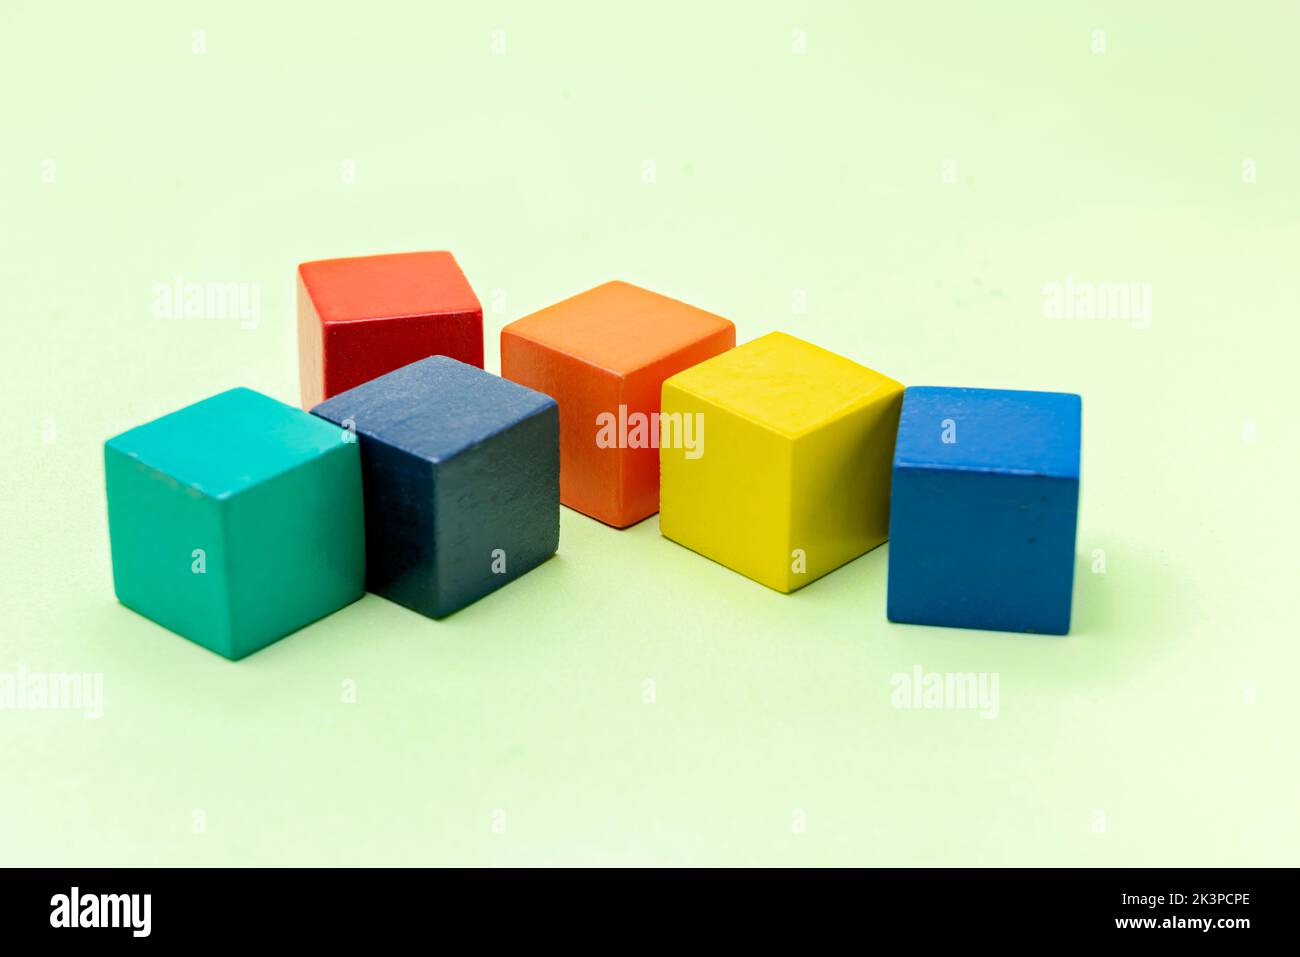 Colorful wooden block toys on a colored background Stock Photo